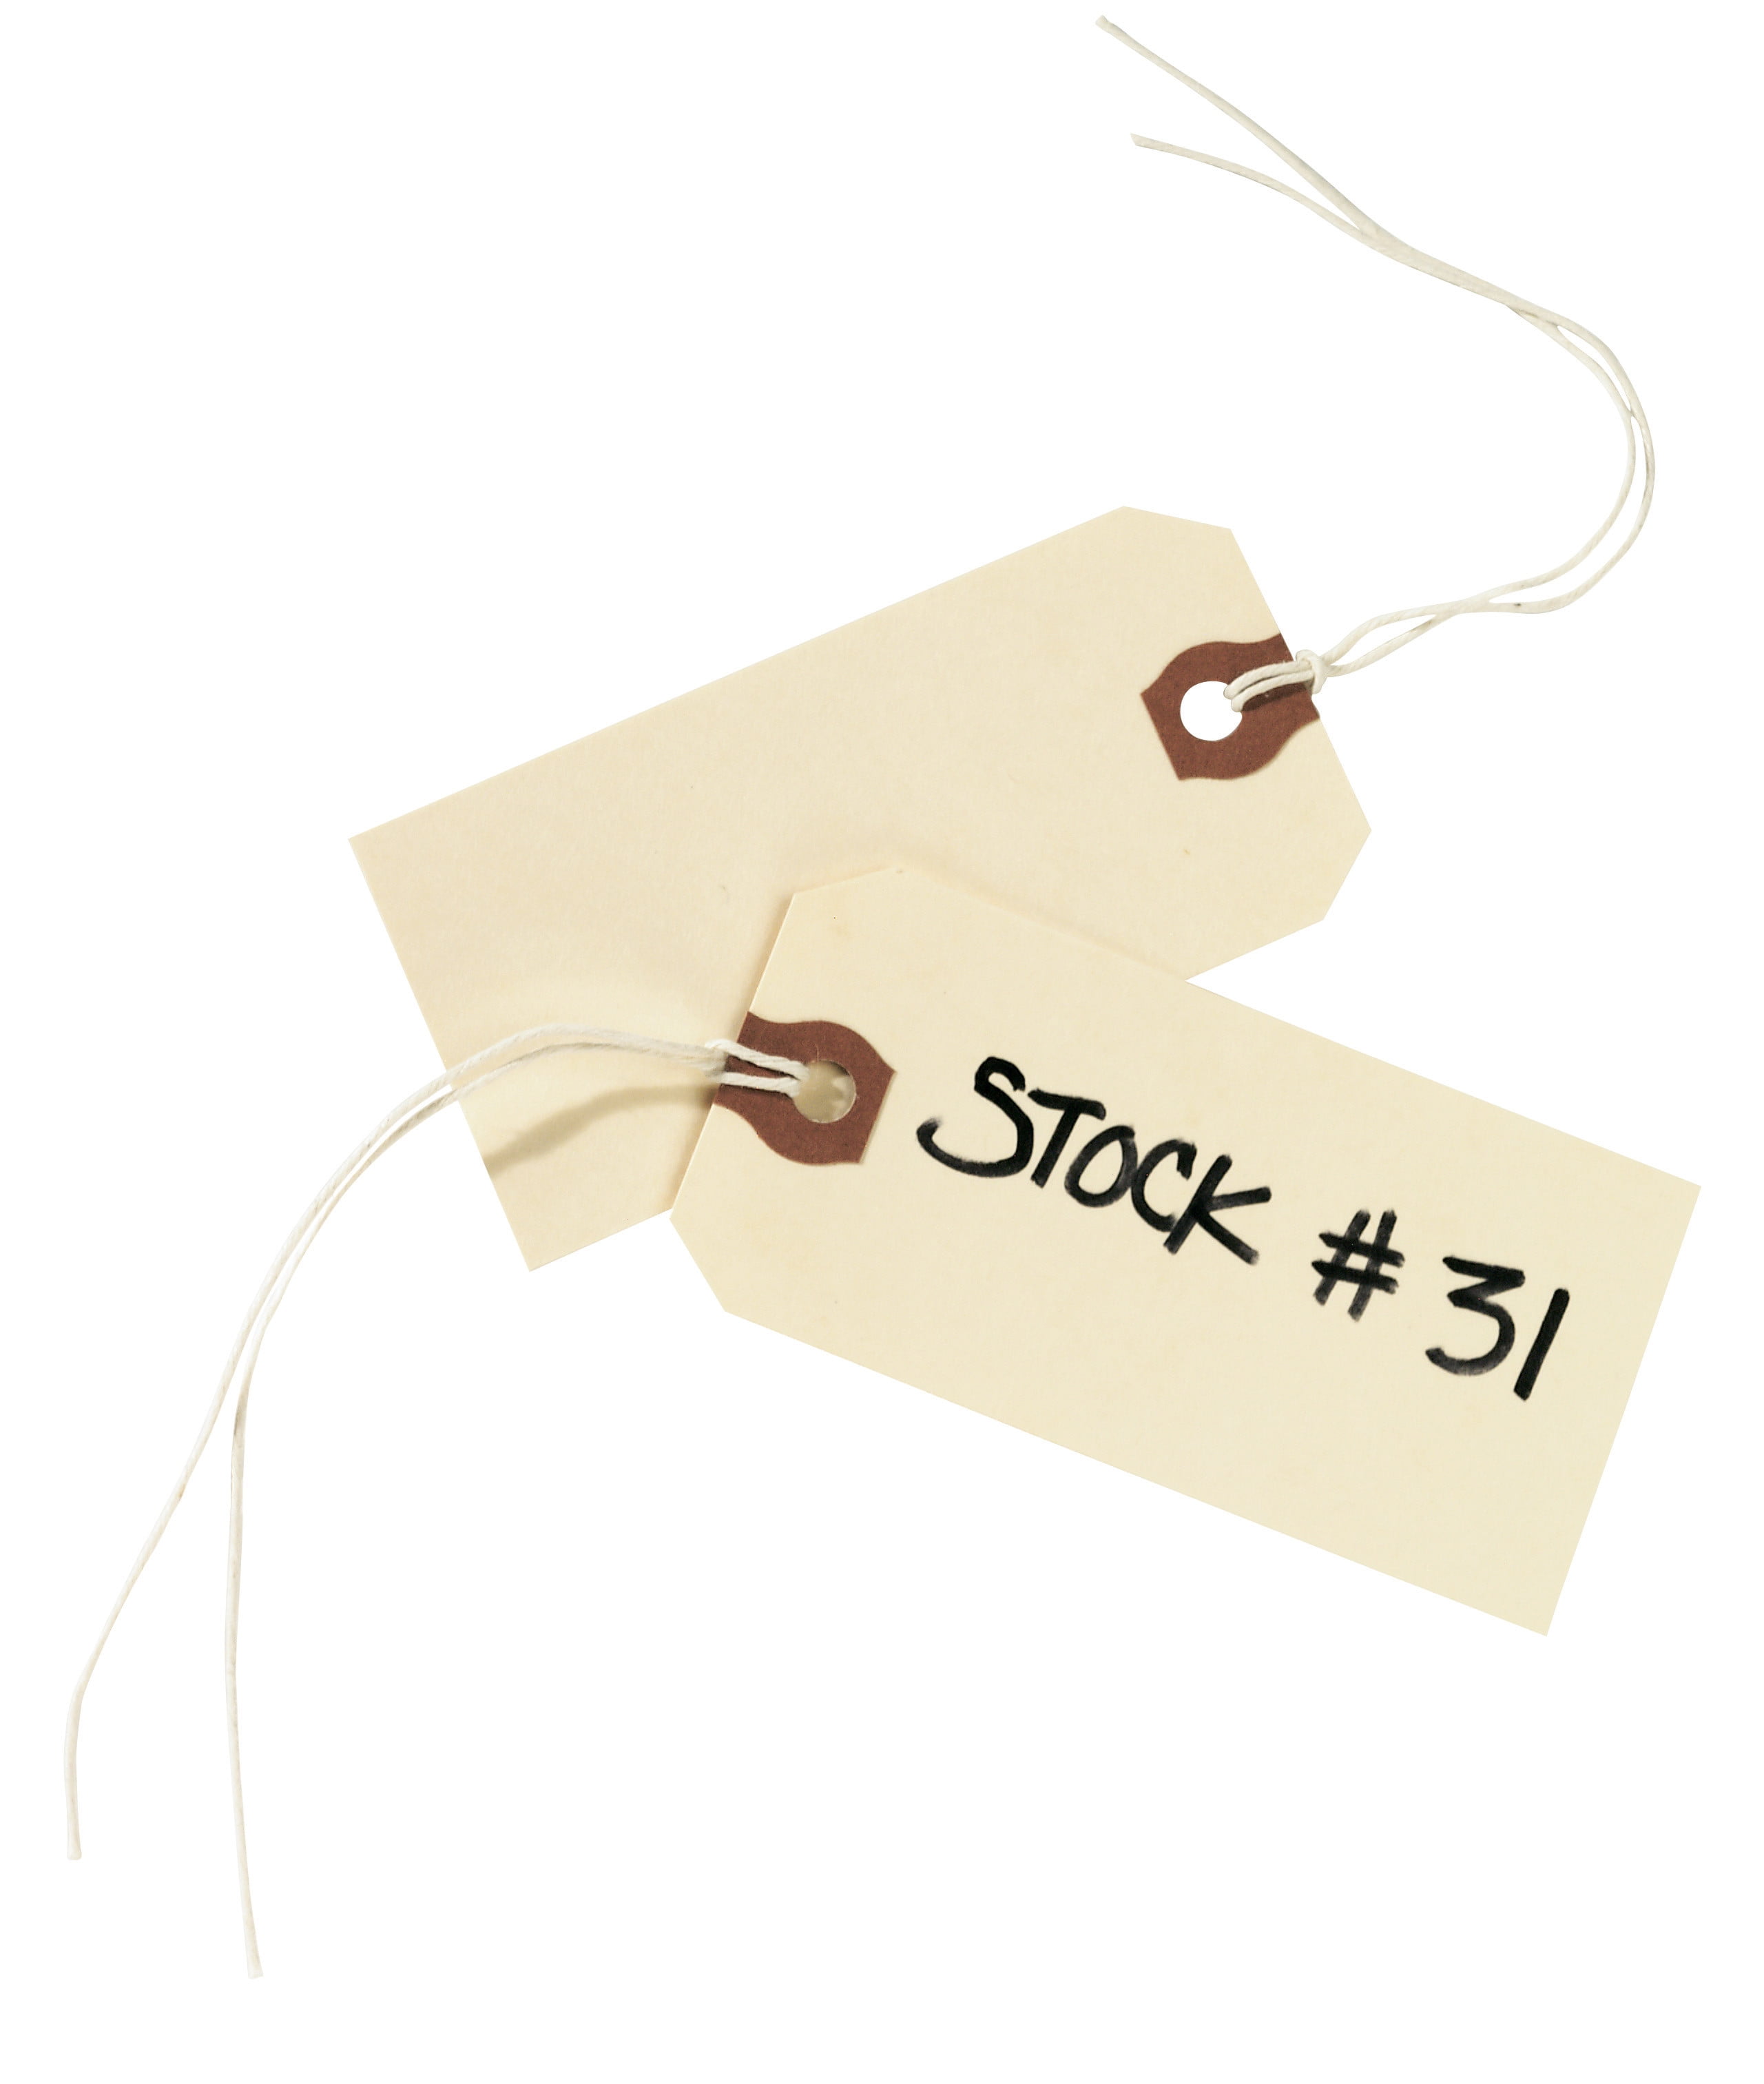 Avery Price Tags with String Attached, 11.5 pt. Stock, 3-3/4 x 1-7/8,  1,000 Manila Hang Tags (12503)